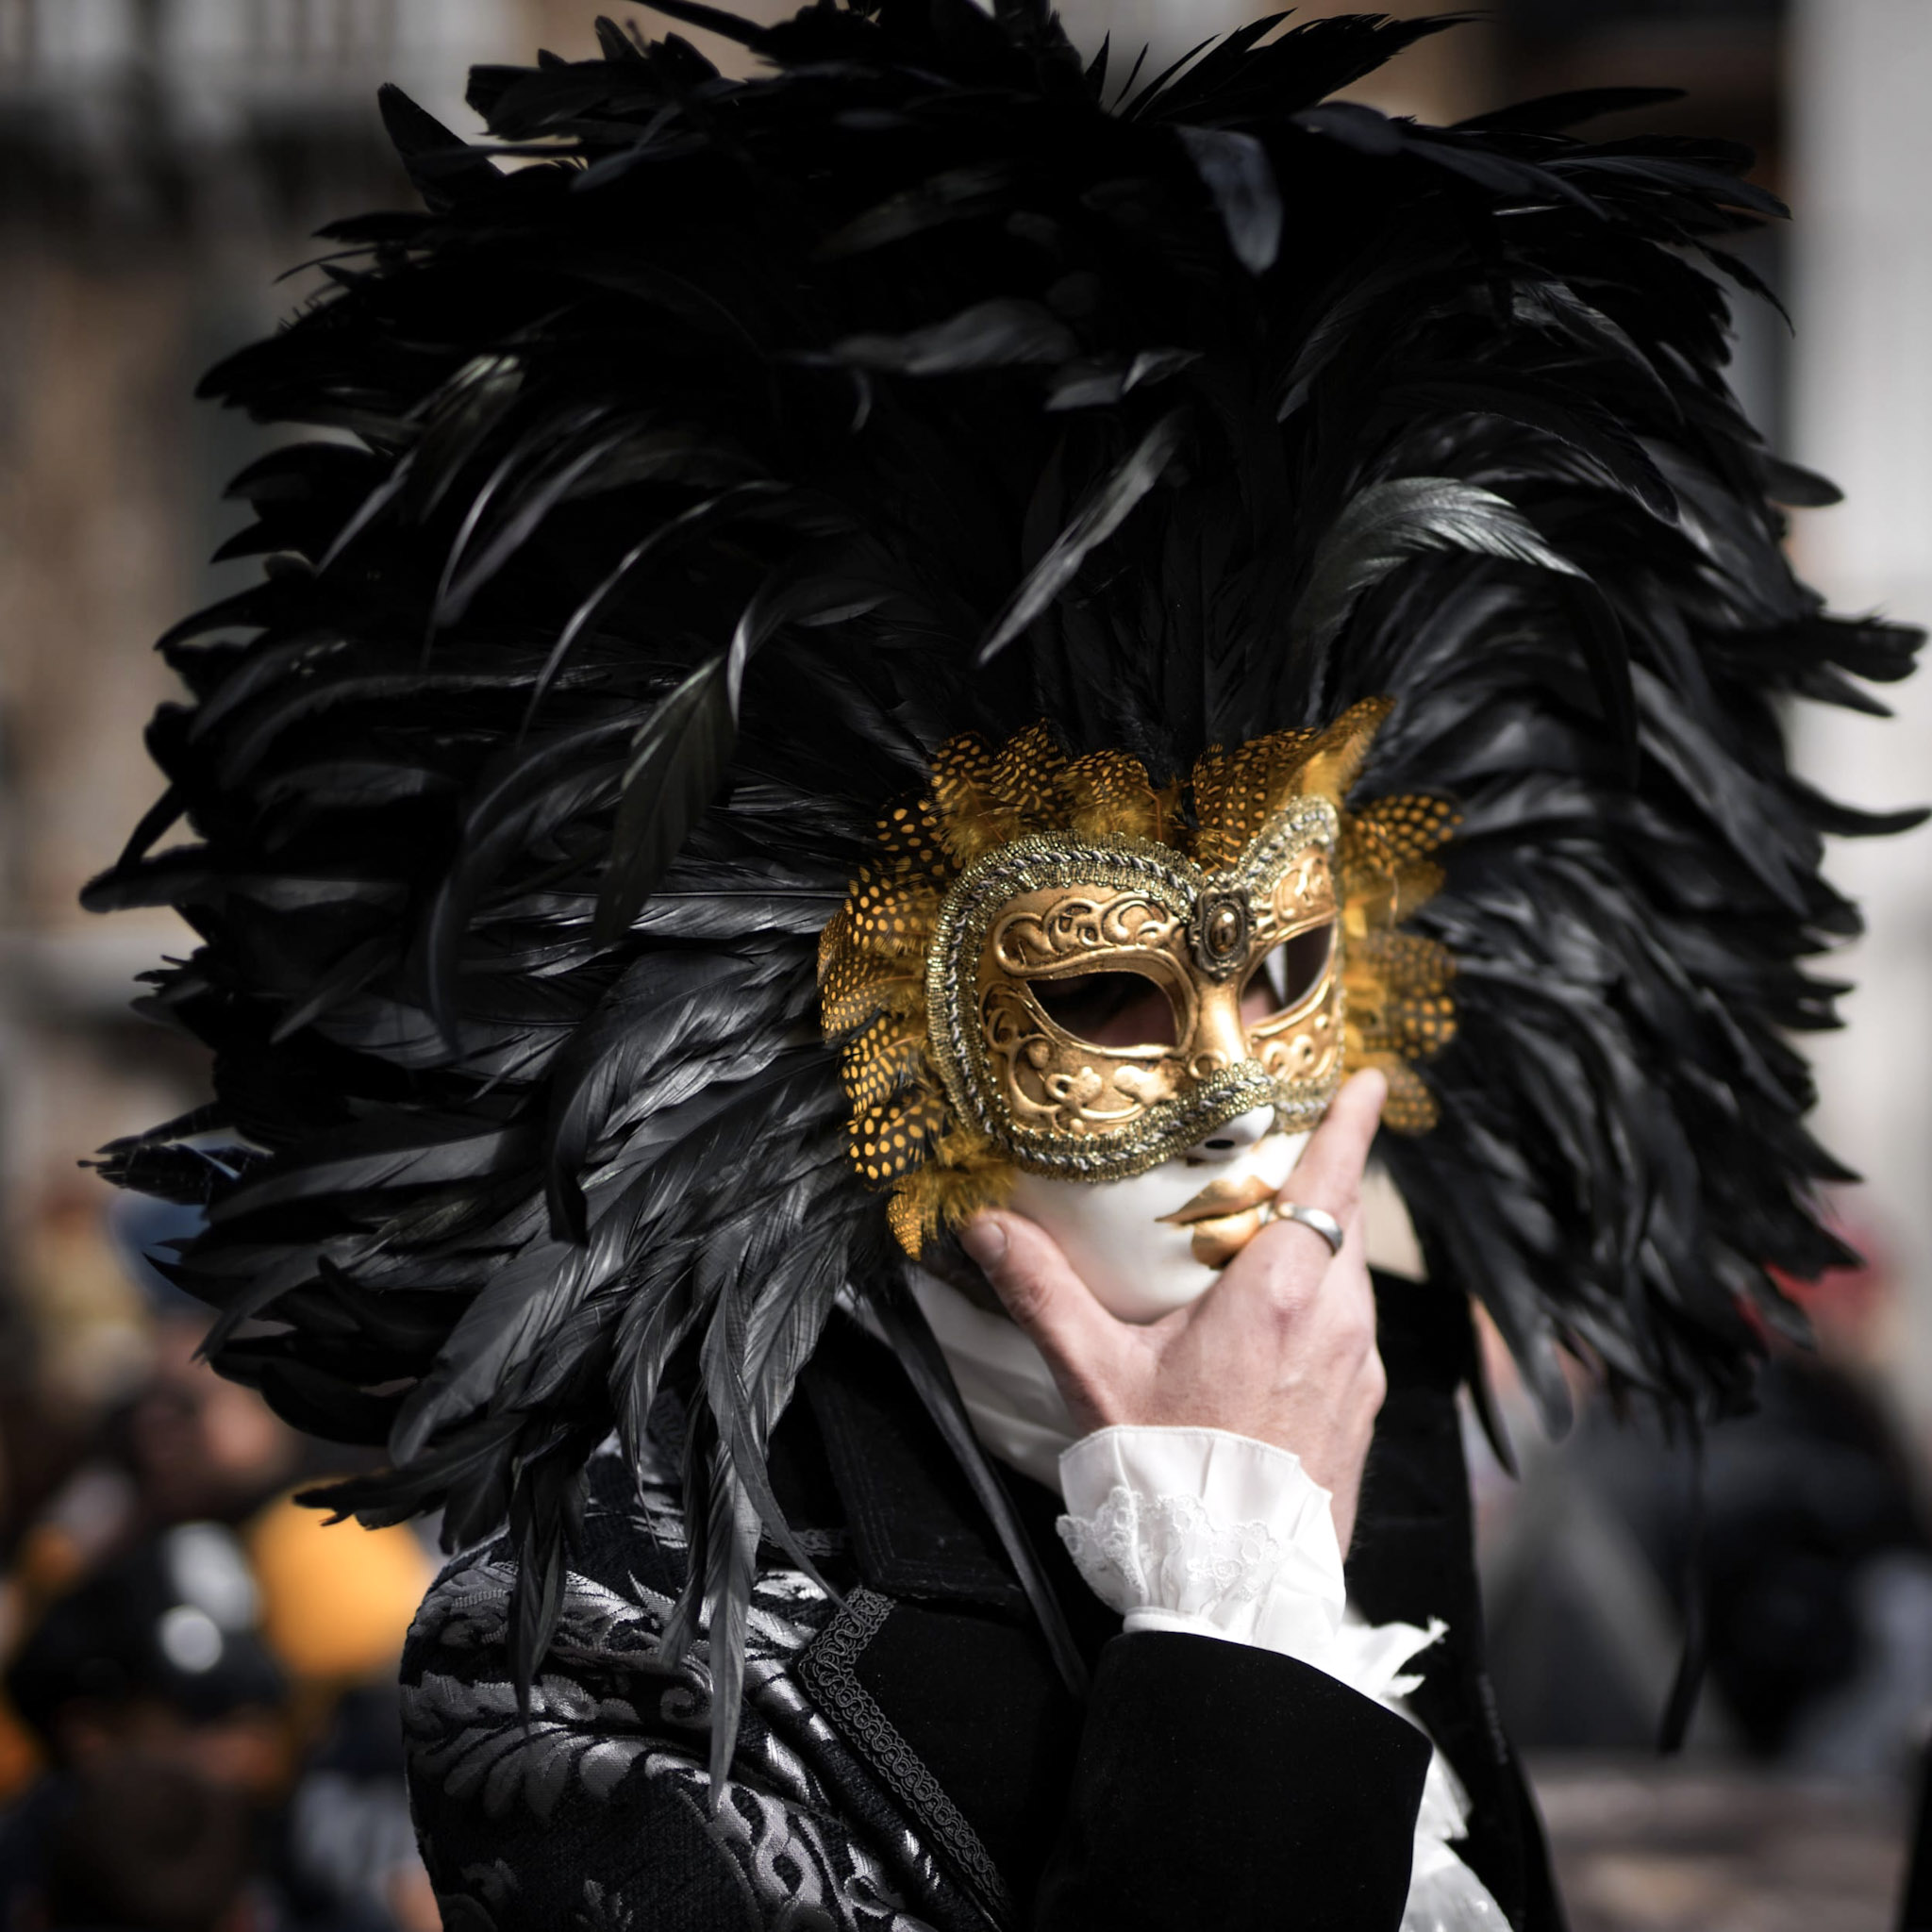 A man wearing a gold mask with black feathers for Mardi Gras. This article covers cultural festivals you should visit in your lifetime.